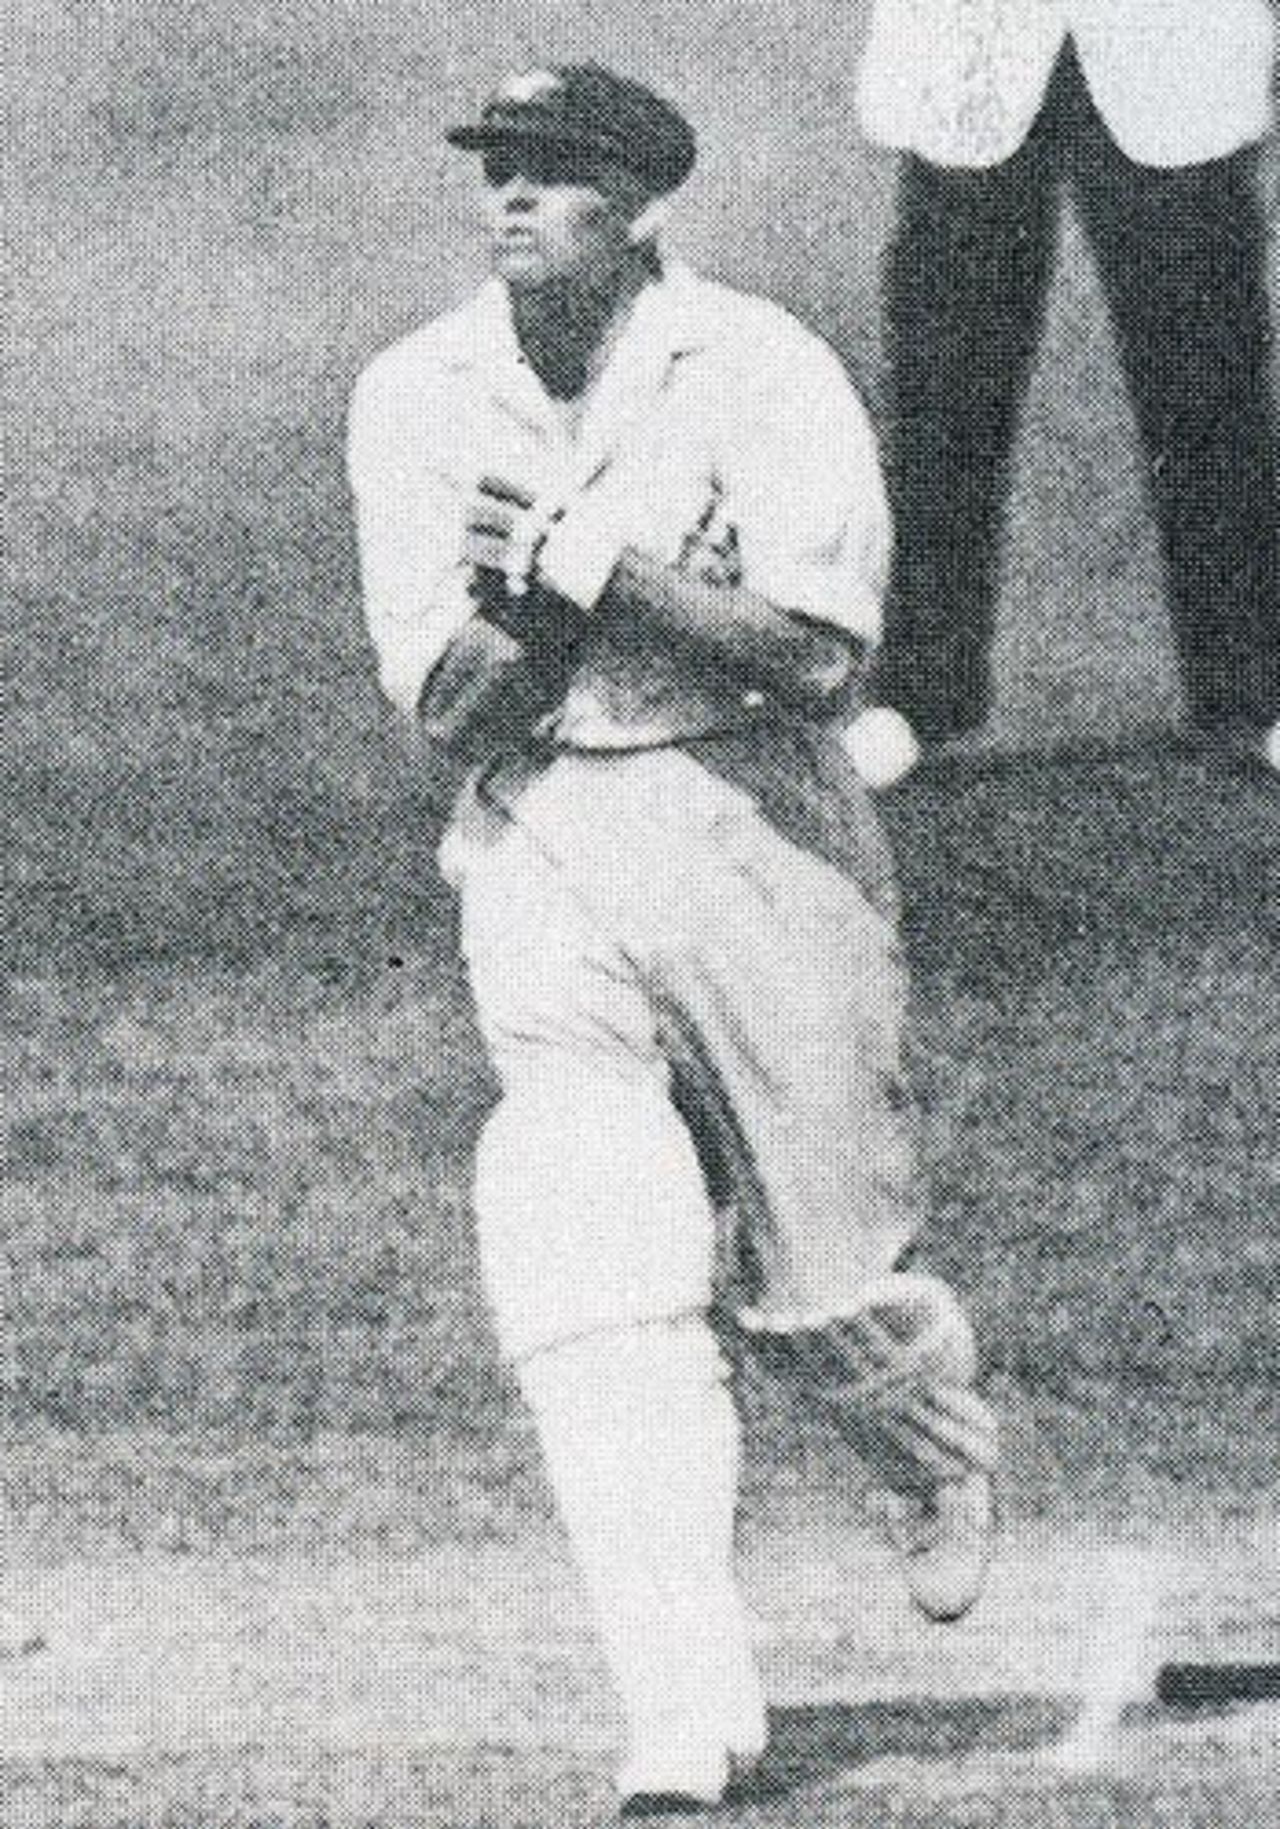 Bill Woodfull is struck under the heart by Harold Larwood (close up), Australia v England, 3rd Test, Adelaide, January 14, 1933